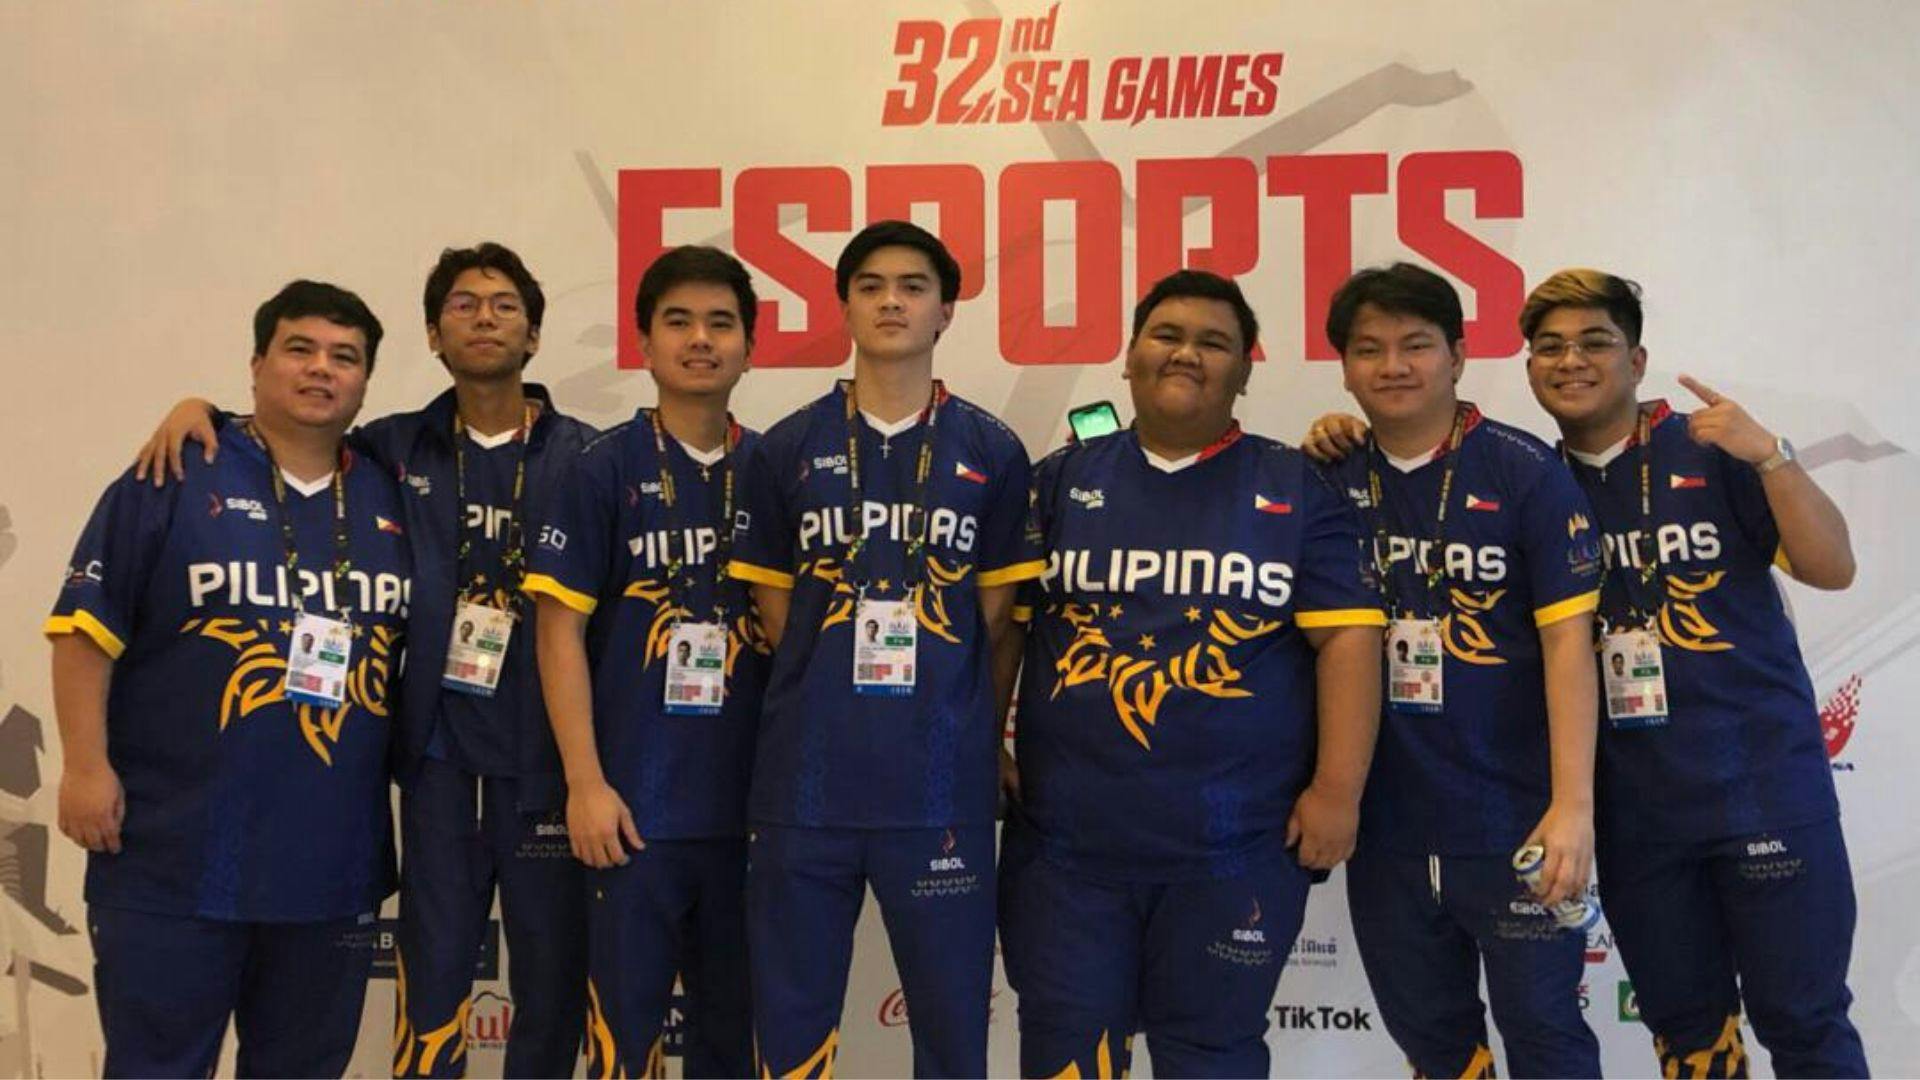 SIBOL secures bronze medal in Valorant in 32nd SEA Games